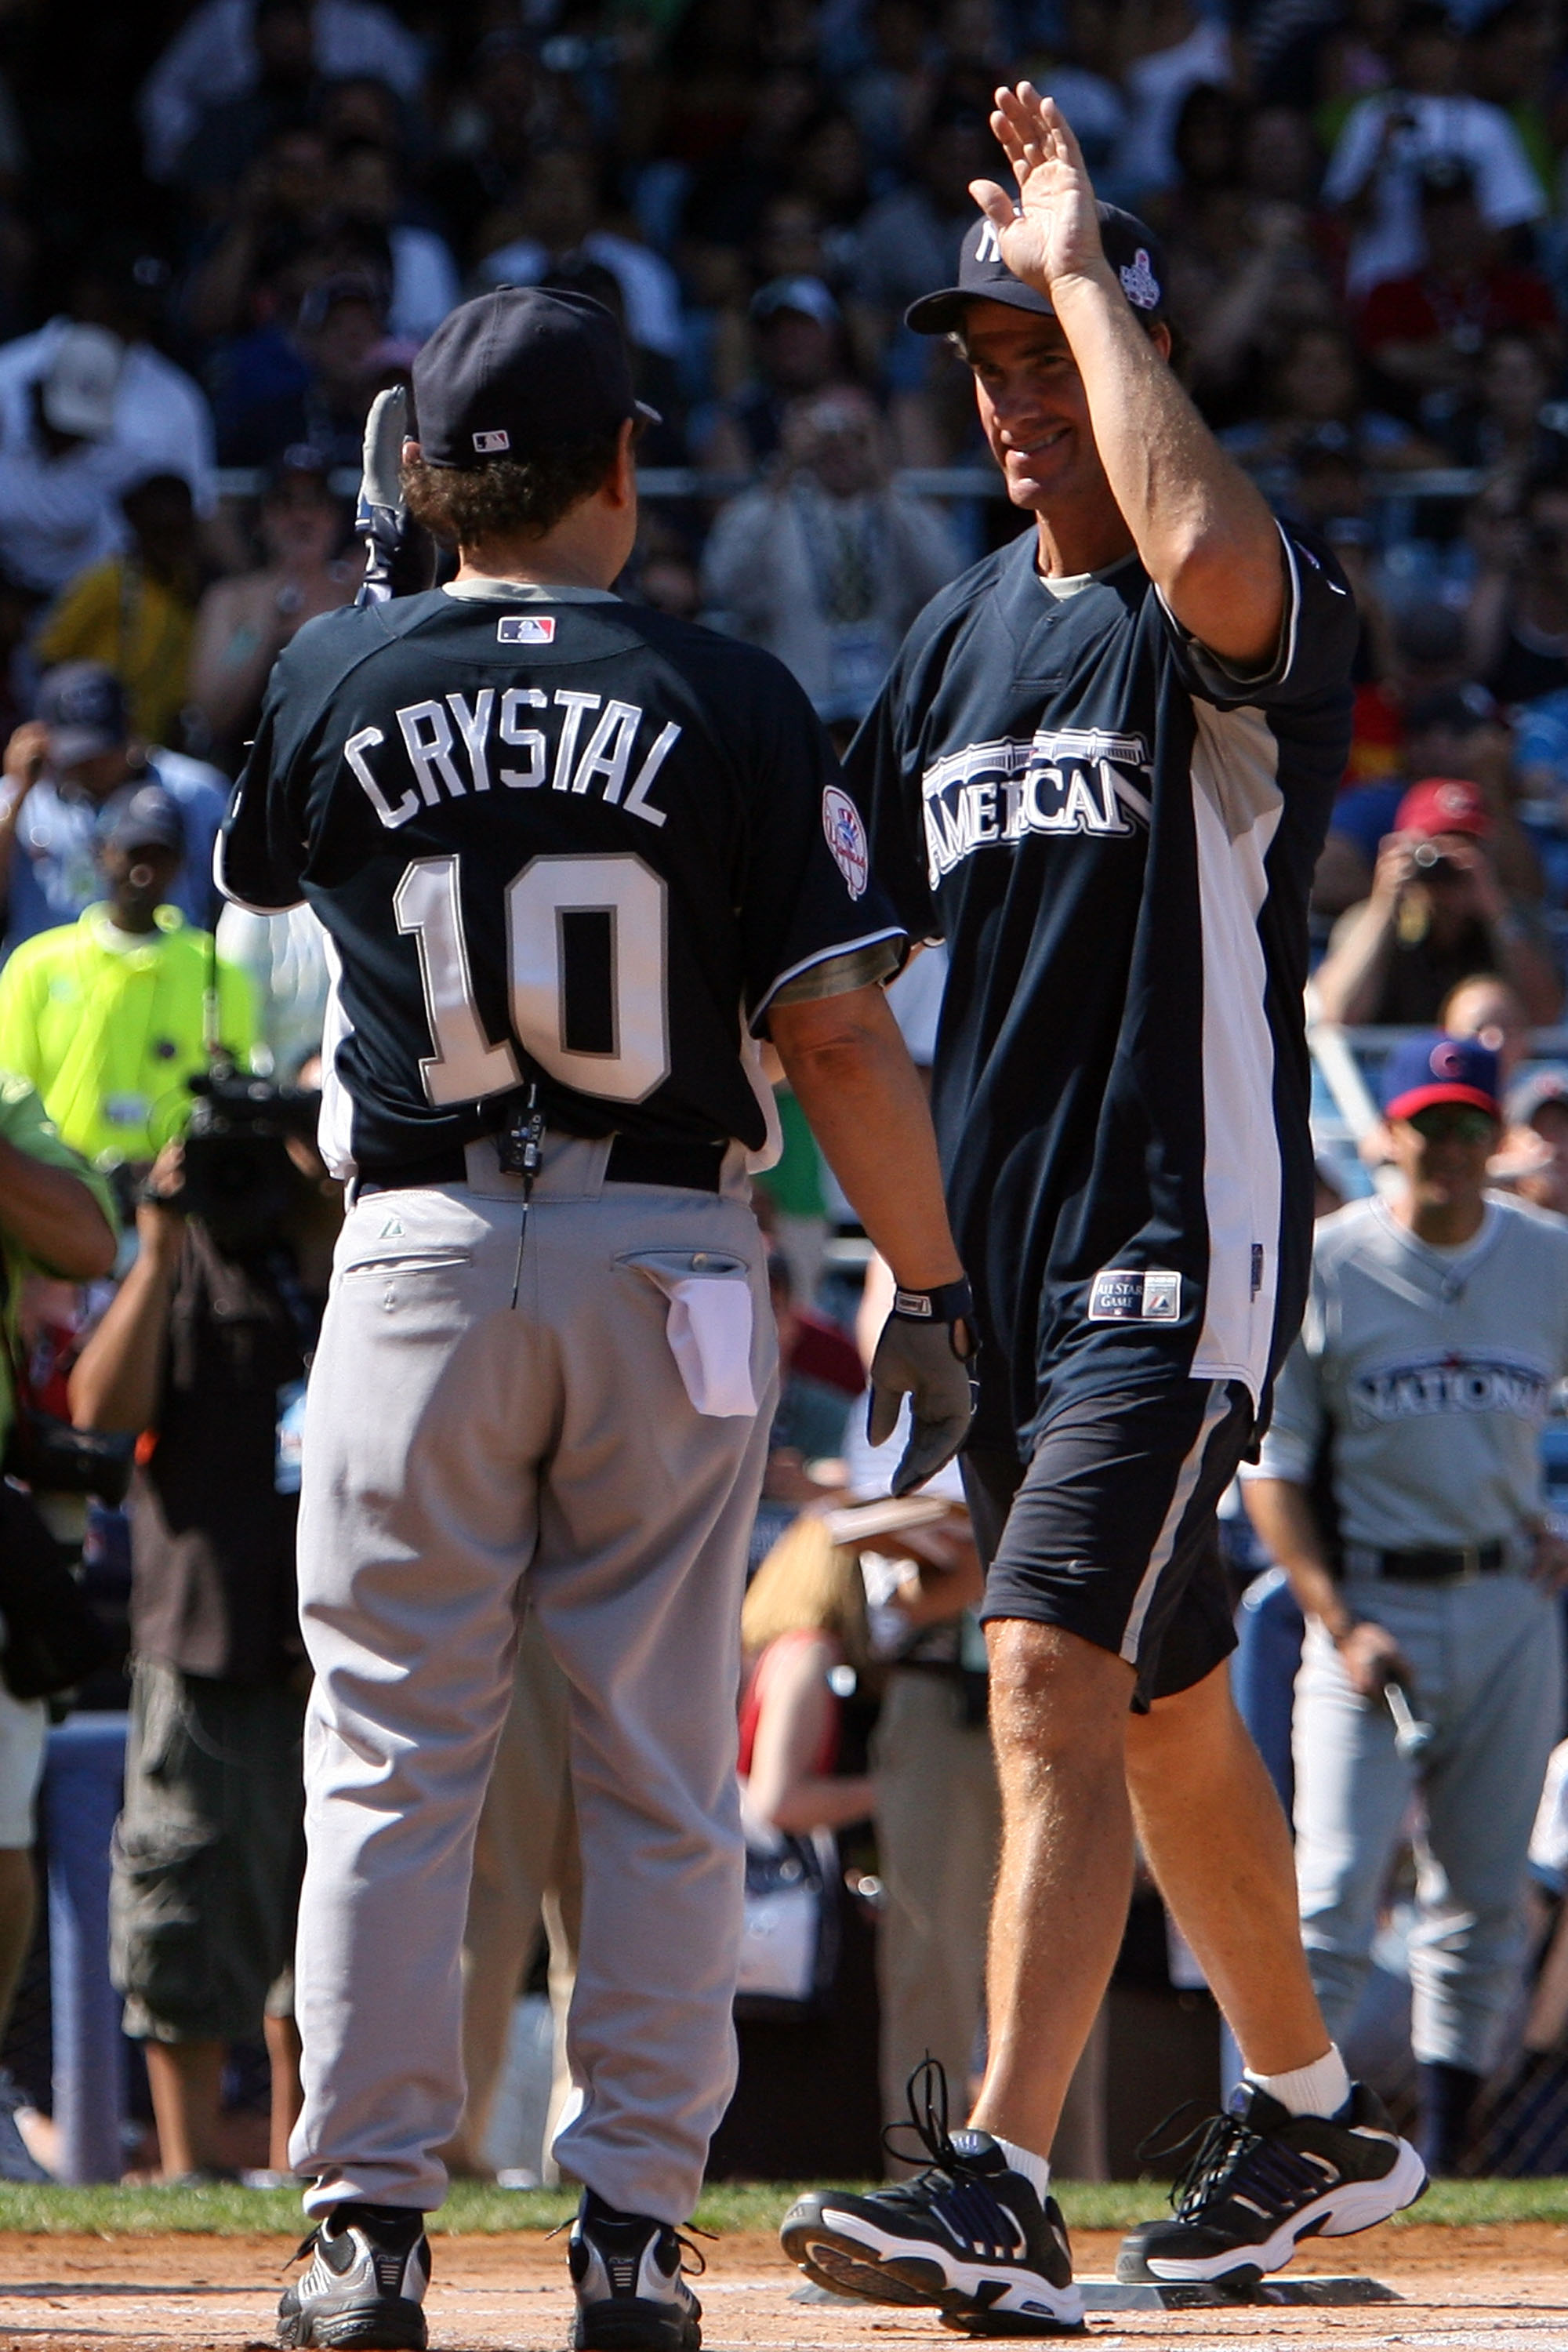 NEW YORK - JULY 13:  Actor Billy Crystal and Paul O'Neil play in the 2008 MLB All-Star Week Taco Bell All-Star Legends & Celebrity Softball Game at Yankee Stadium on July 13, 2008 in New York City.  (Photo by Bryan Bedder/Getty Images)